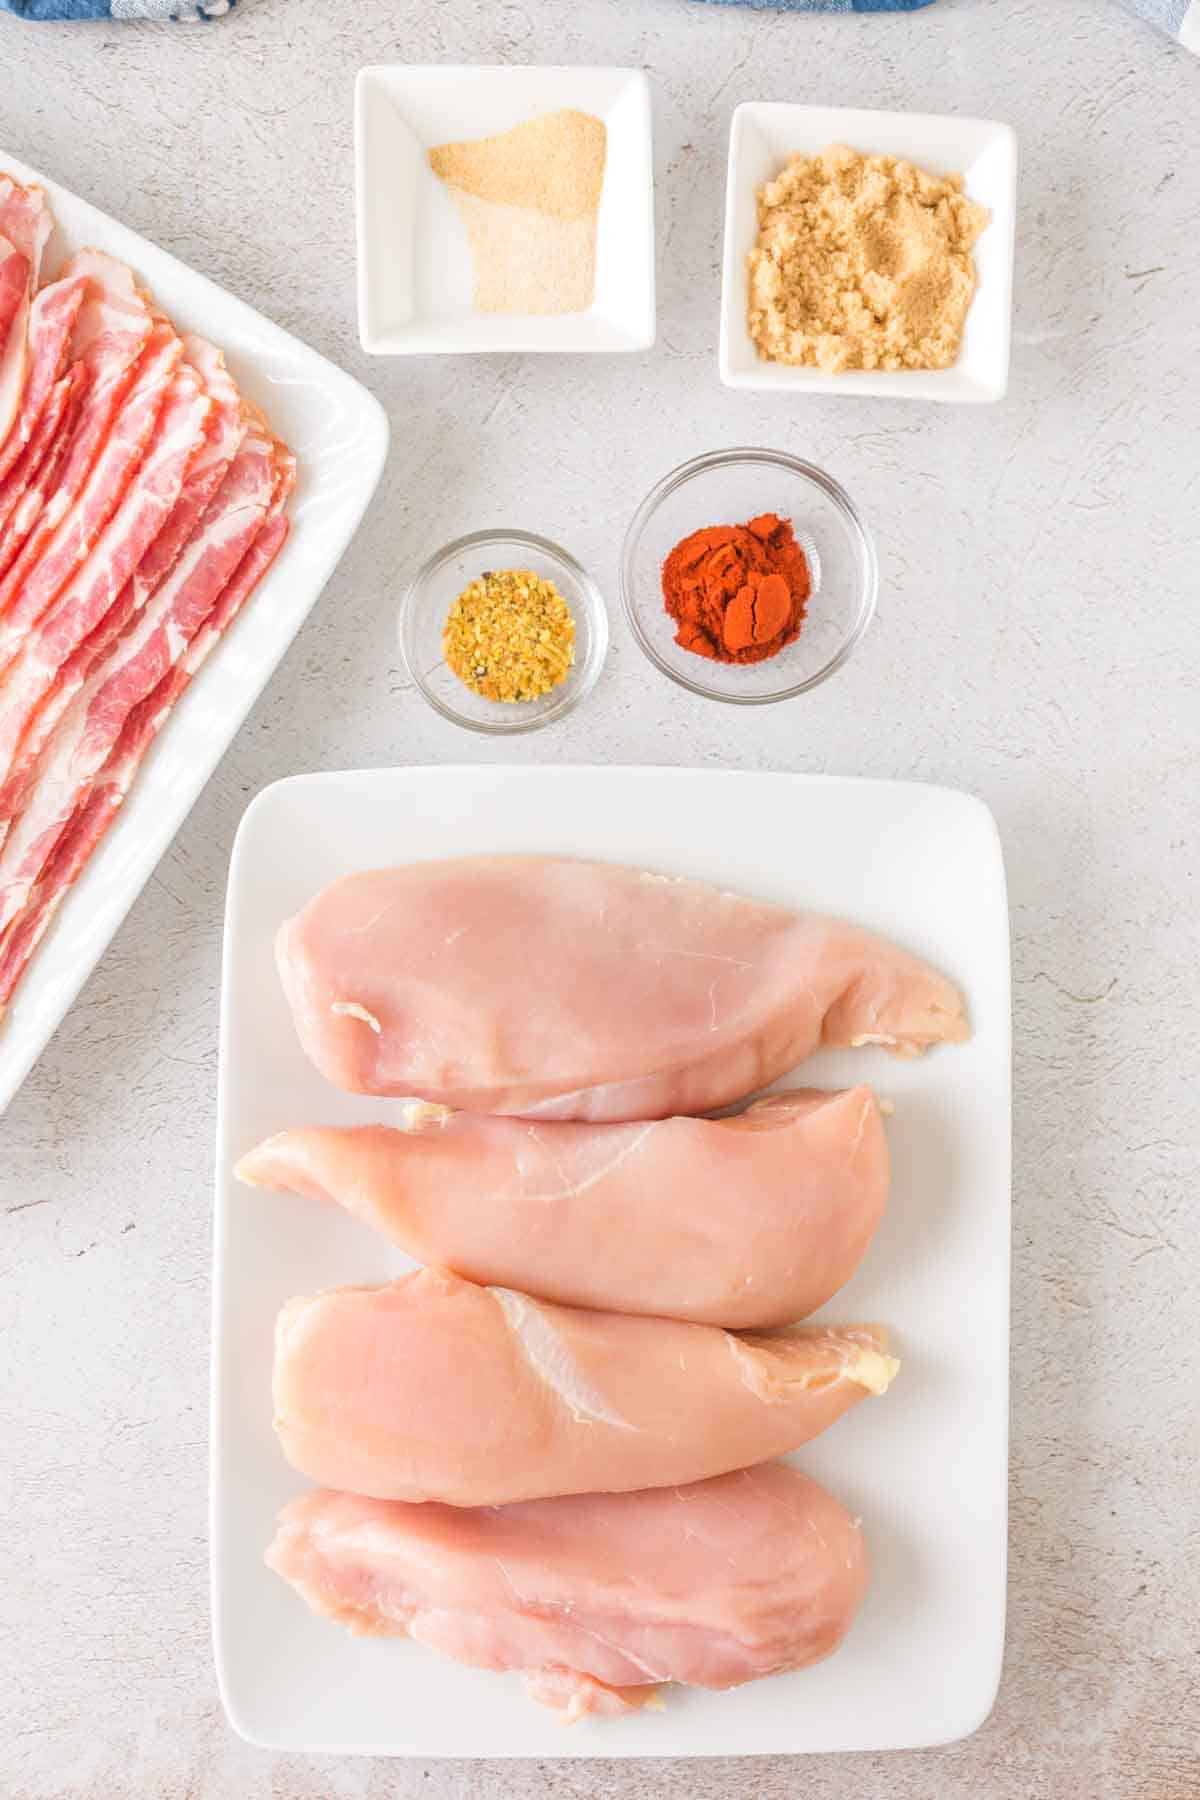 Ingredients for bacon wrapped chicken.
